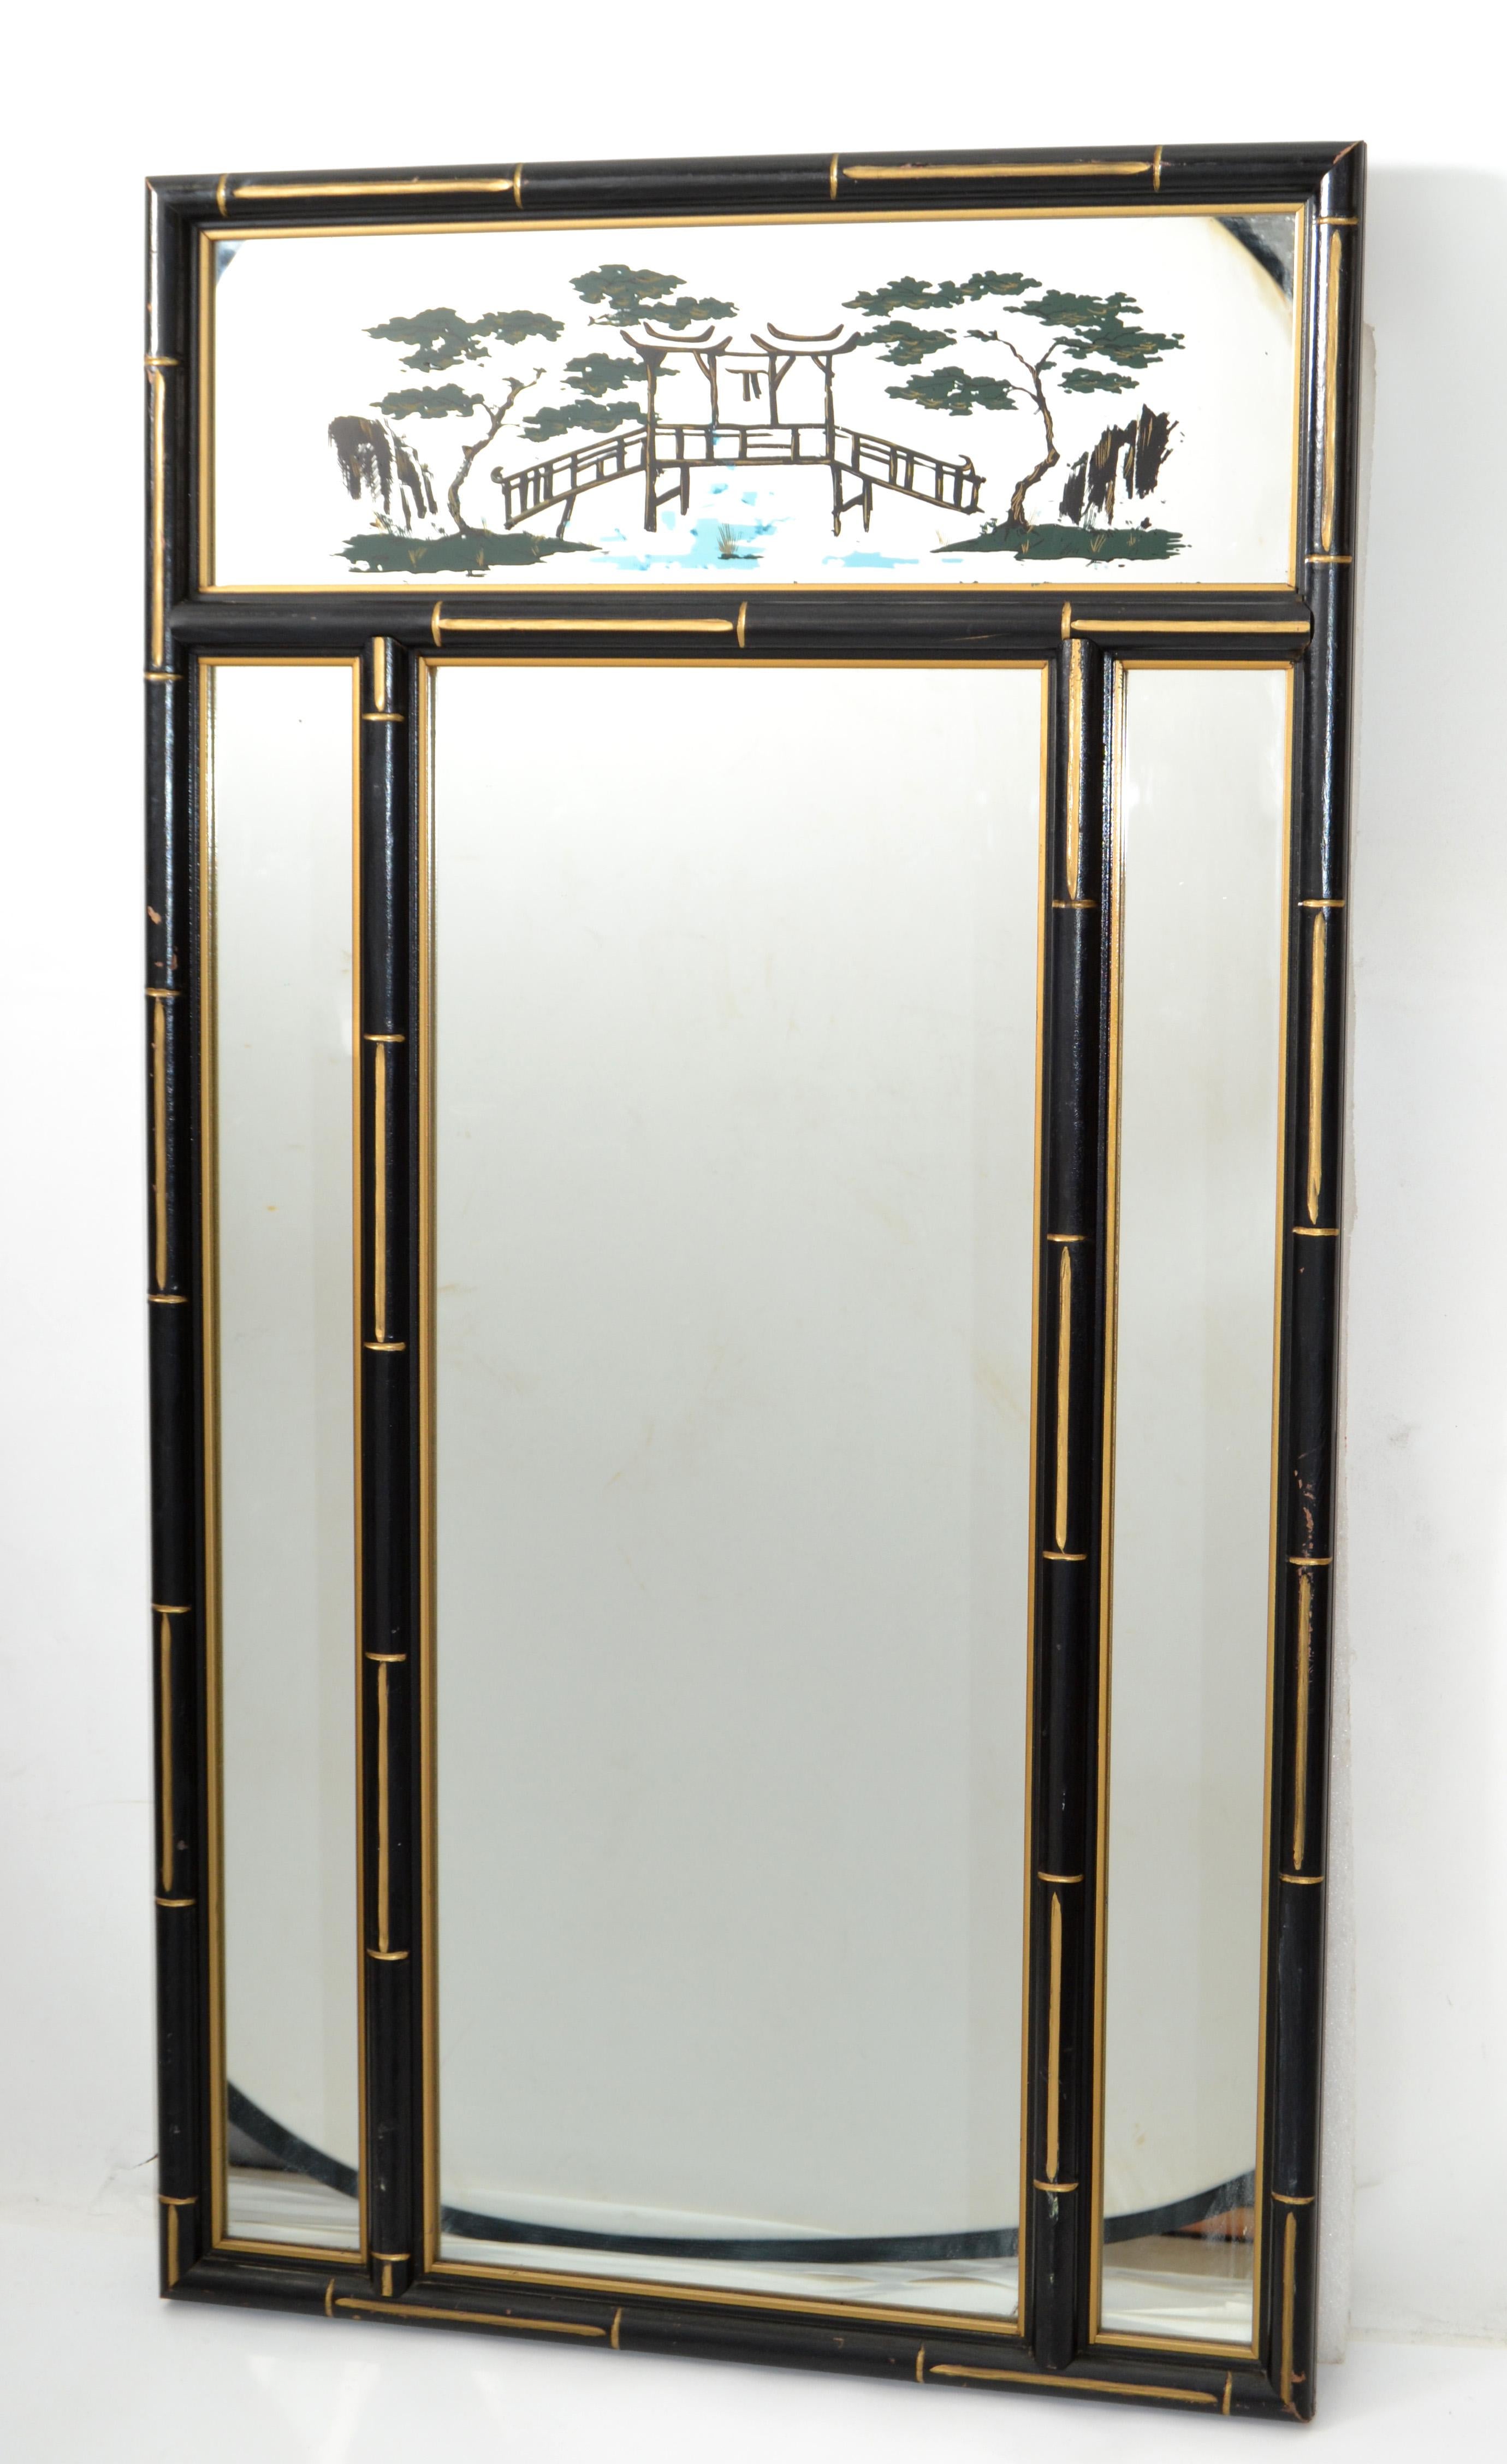 Hand-Painted Chinoiserie Faux Bamboo Wall Mirror Black & Gold Finish Chinese Export, 1970 For Sale